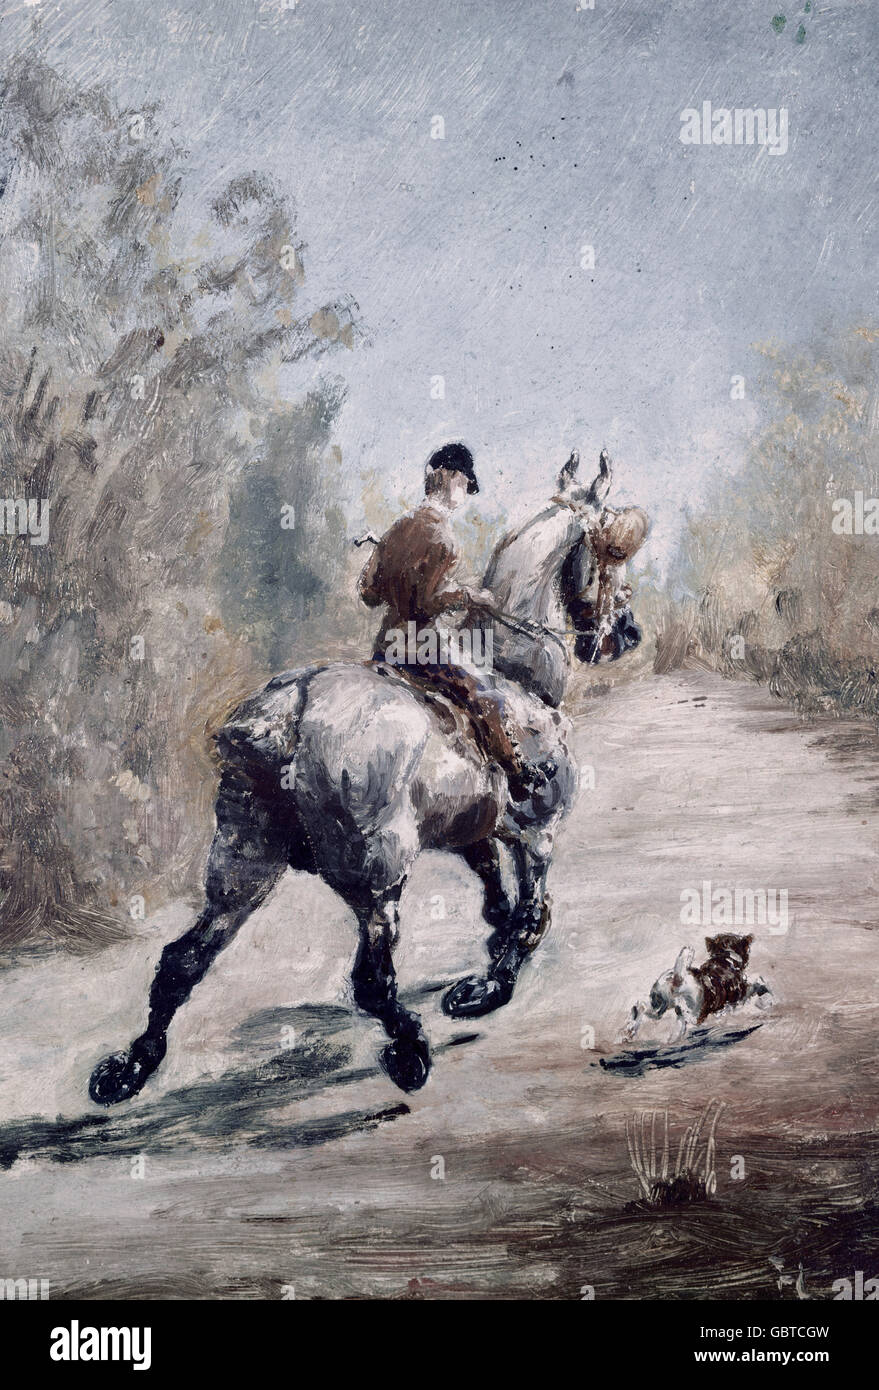 fine arts, Toulouse-Lautrec, Henri de (1864 - 1901), painting 'Horse And Rider With A Little Dog', 1879, Museum Albi, Stock Photo